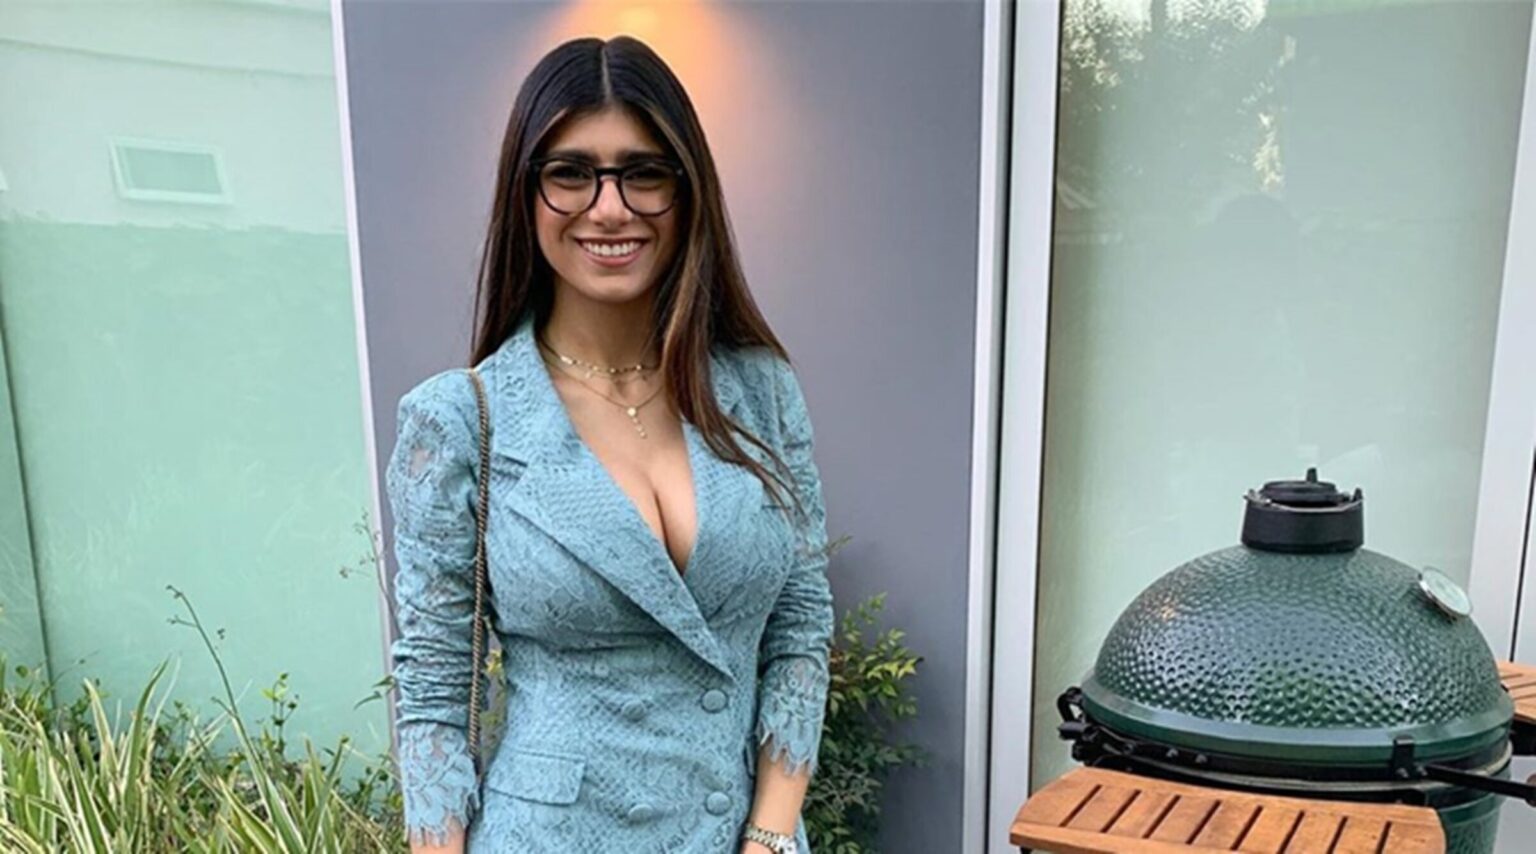 Mia Khalifa has become vocal about her experience making Bang Bros videos, Here's all the tea that's been shared by Mia Khalifa.